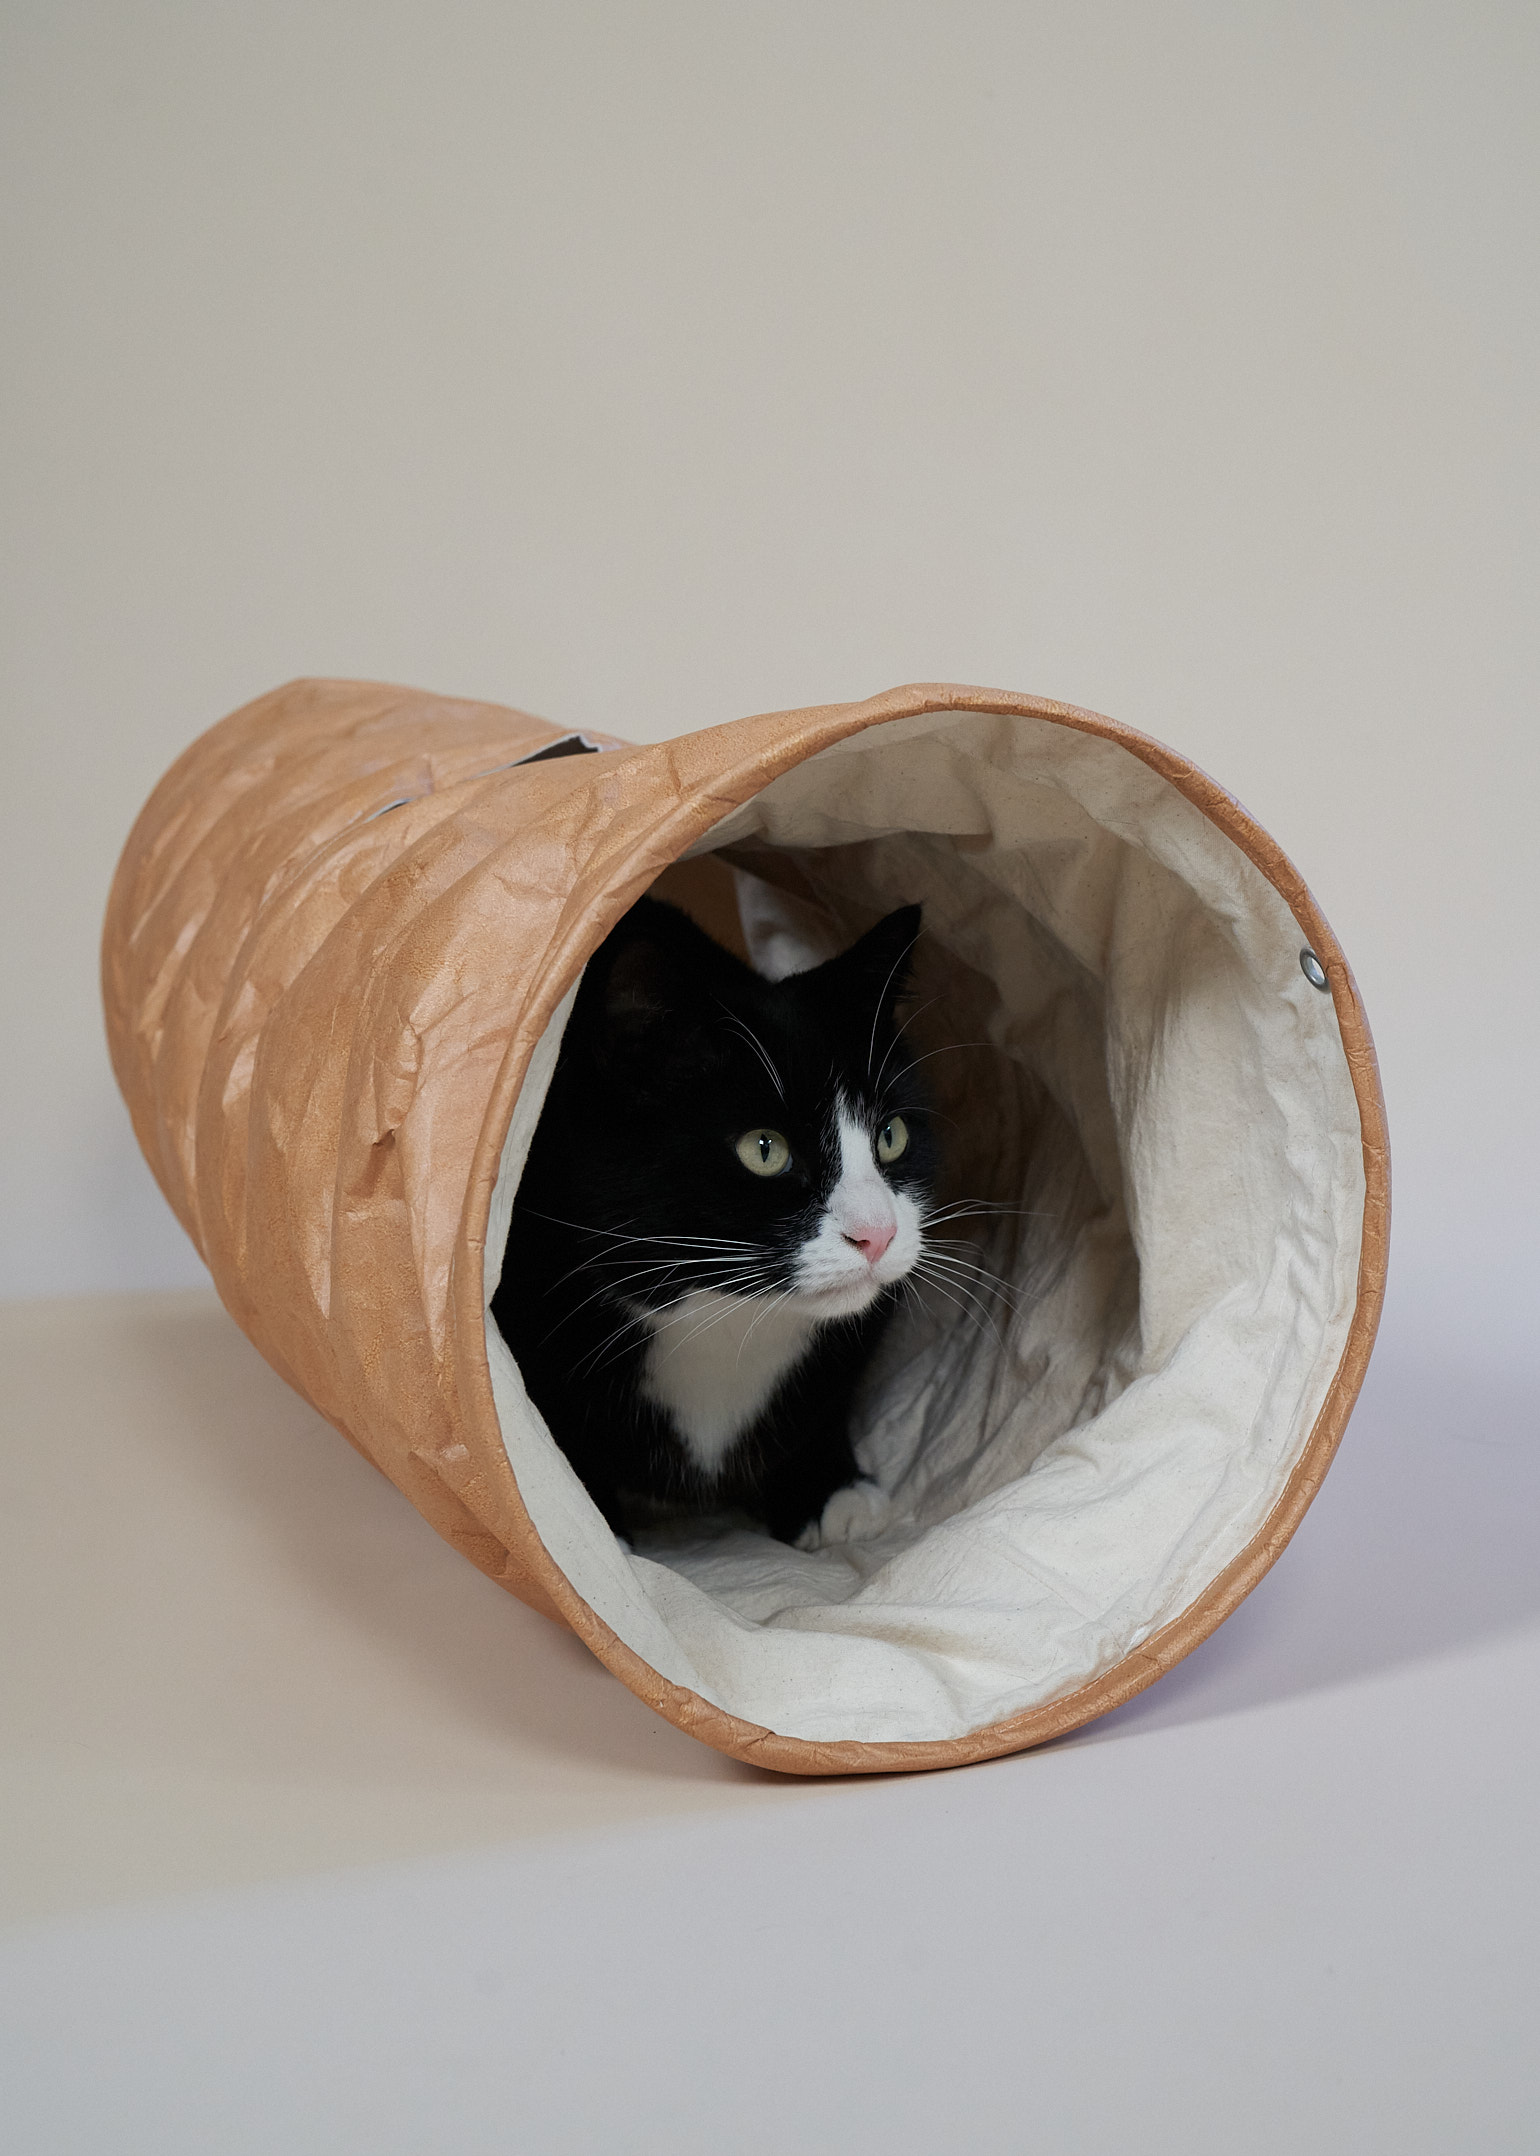 Cat playing in cat tunnel by woods for cats Australia.